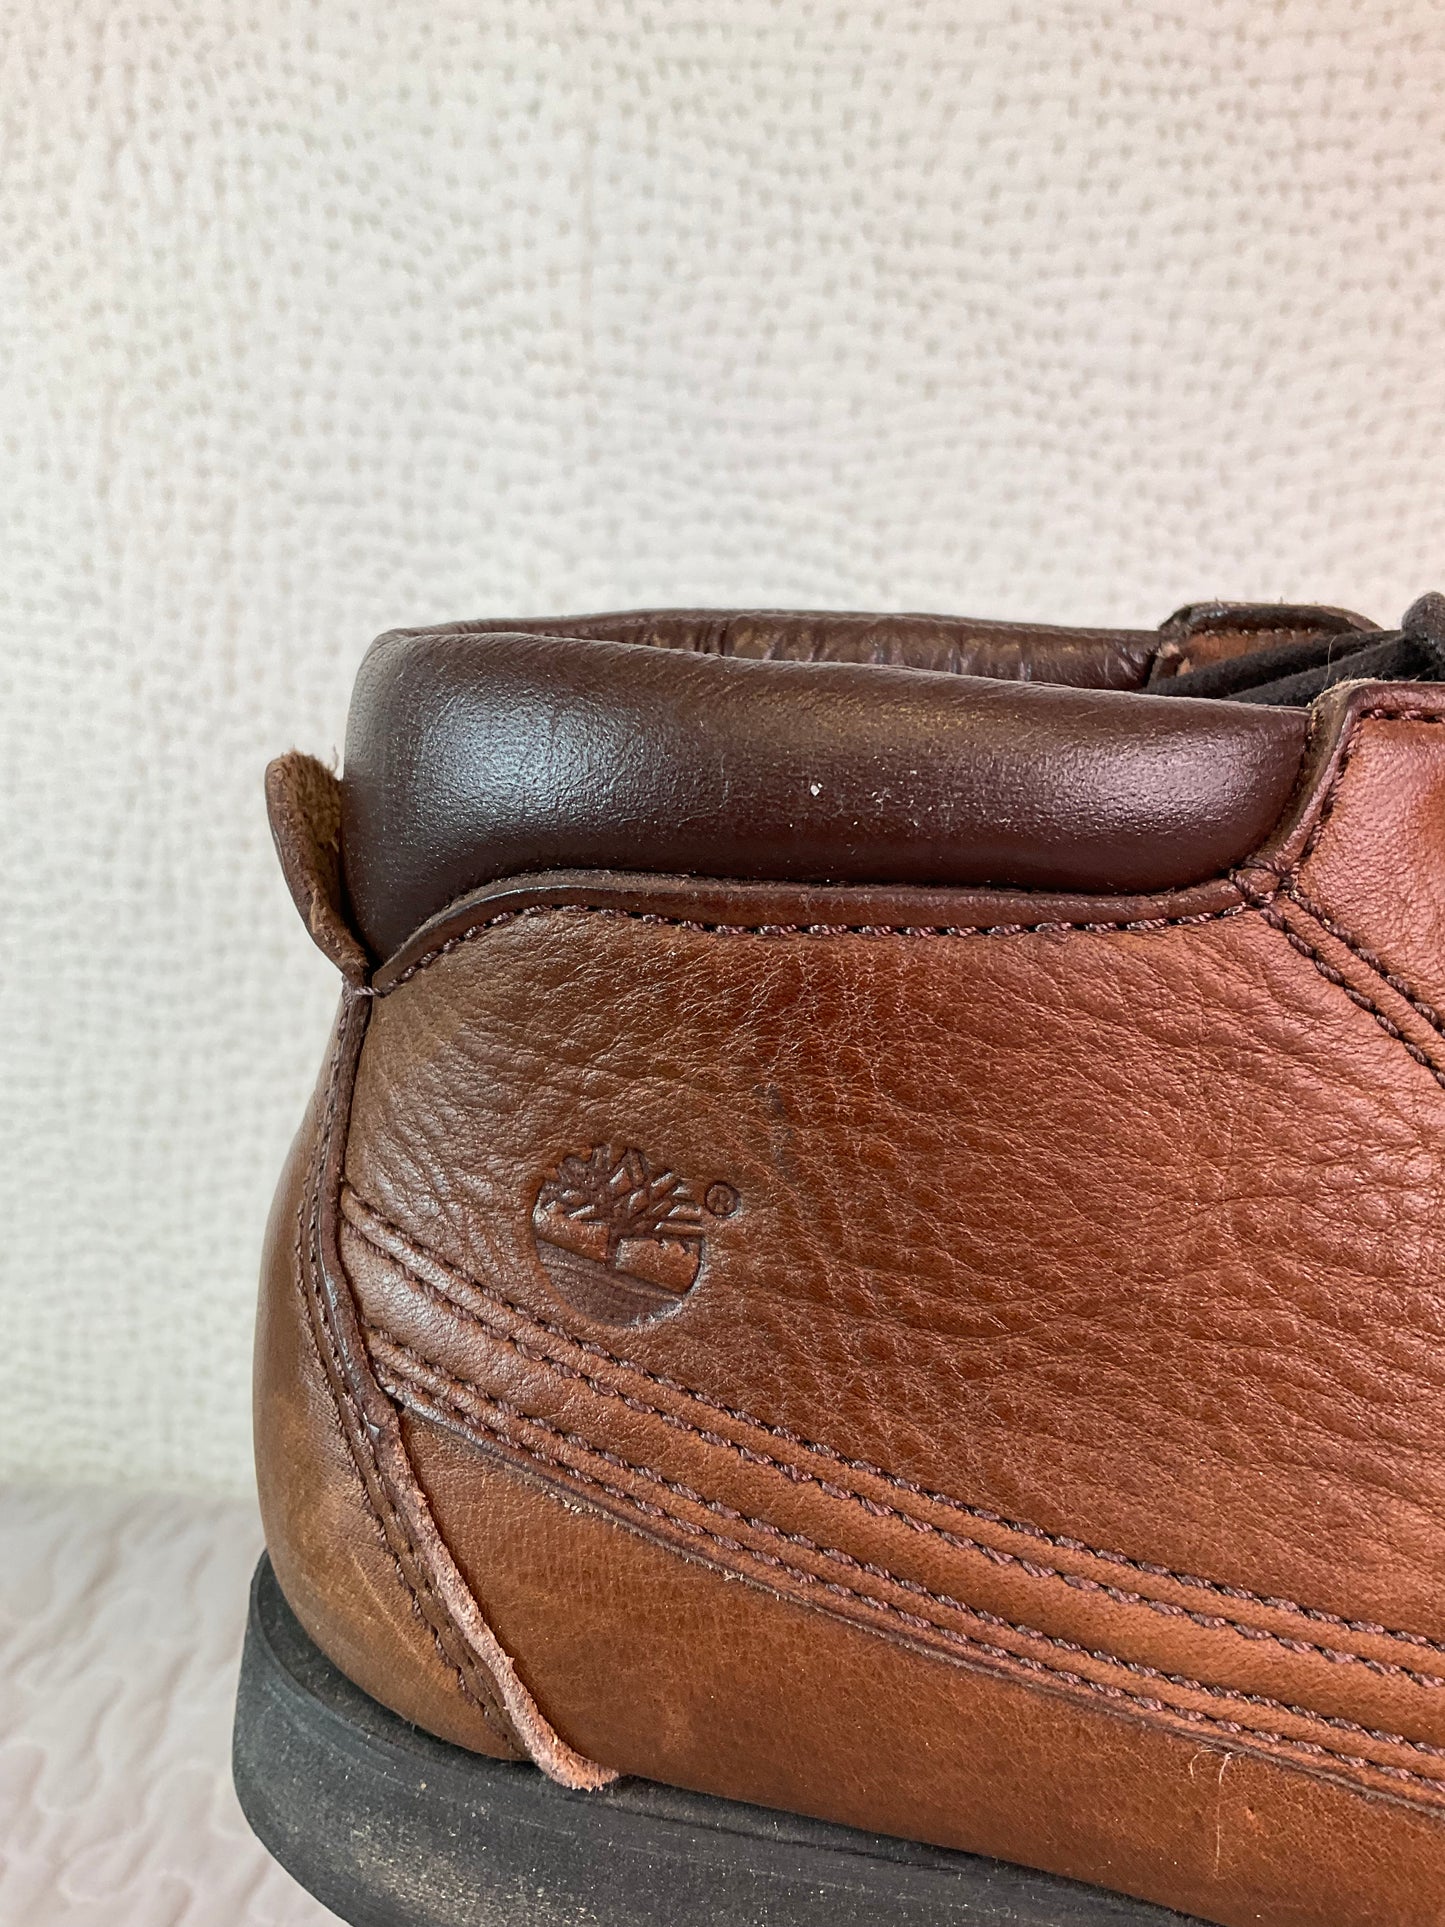 Vintage 90's Timberland Leather Boots, Size 7.5 M